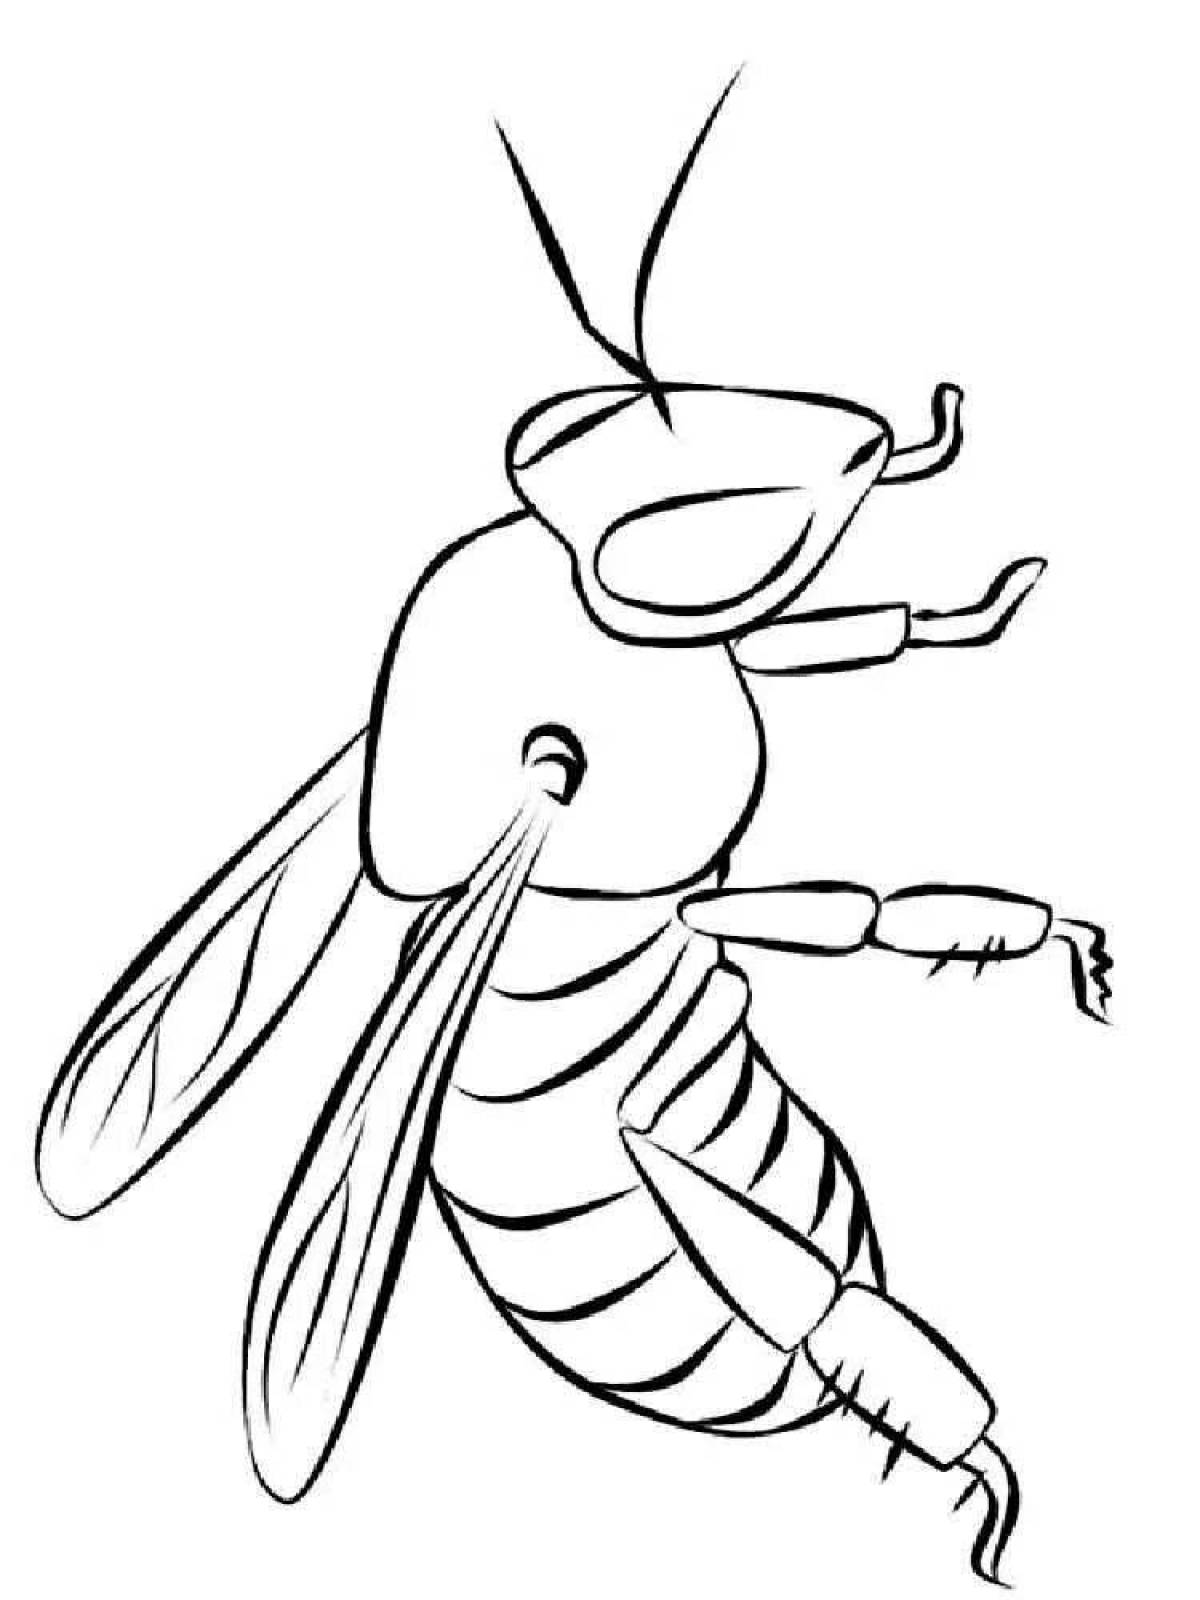 Bright wasp coloring book for kids